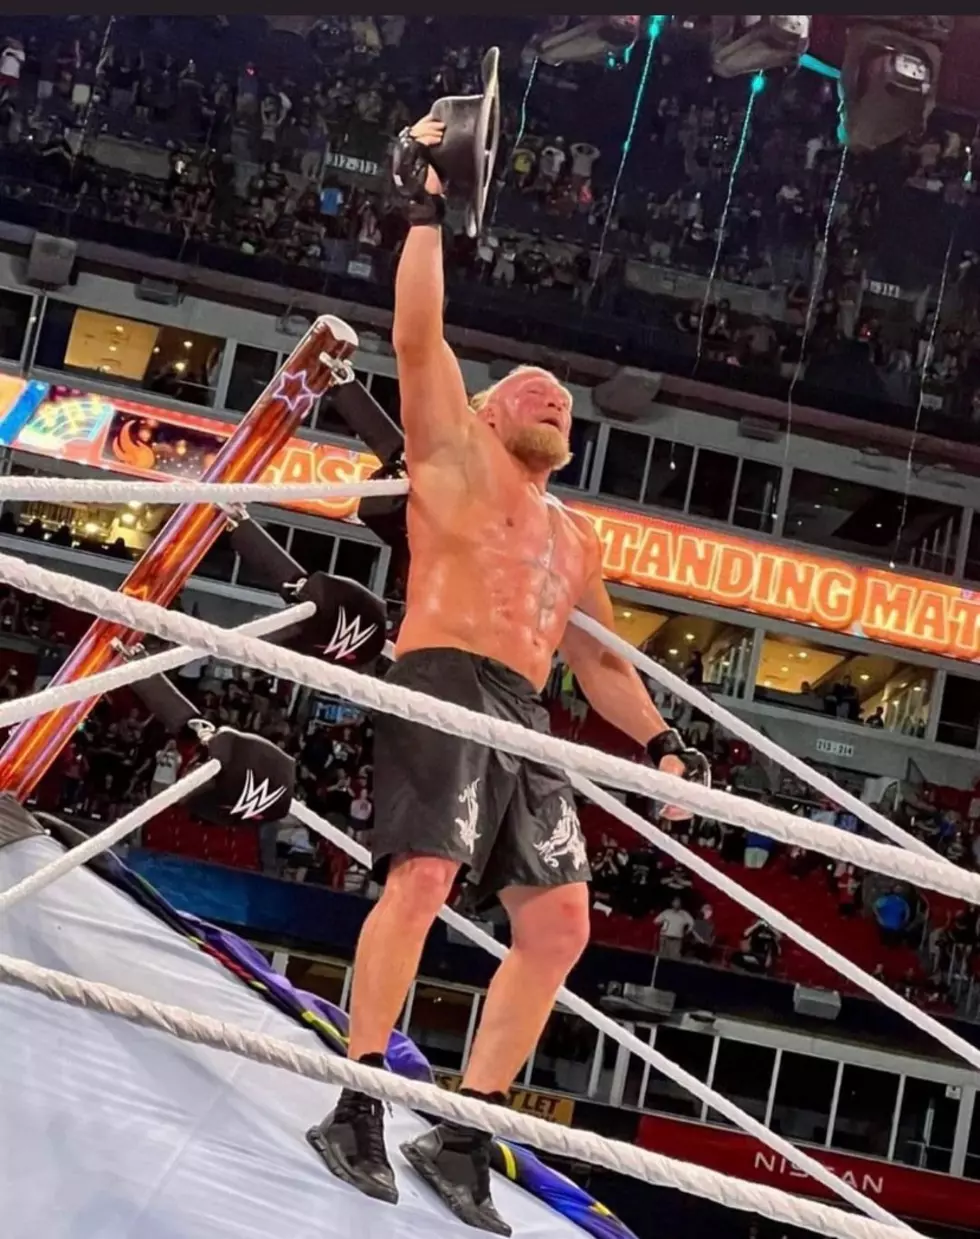 WWE Star Brock Lesnar Uses A Tractor To Help Him Destroy The Ring During Wrestling Match [Video]